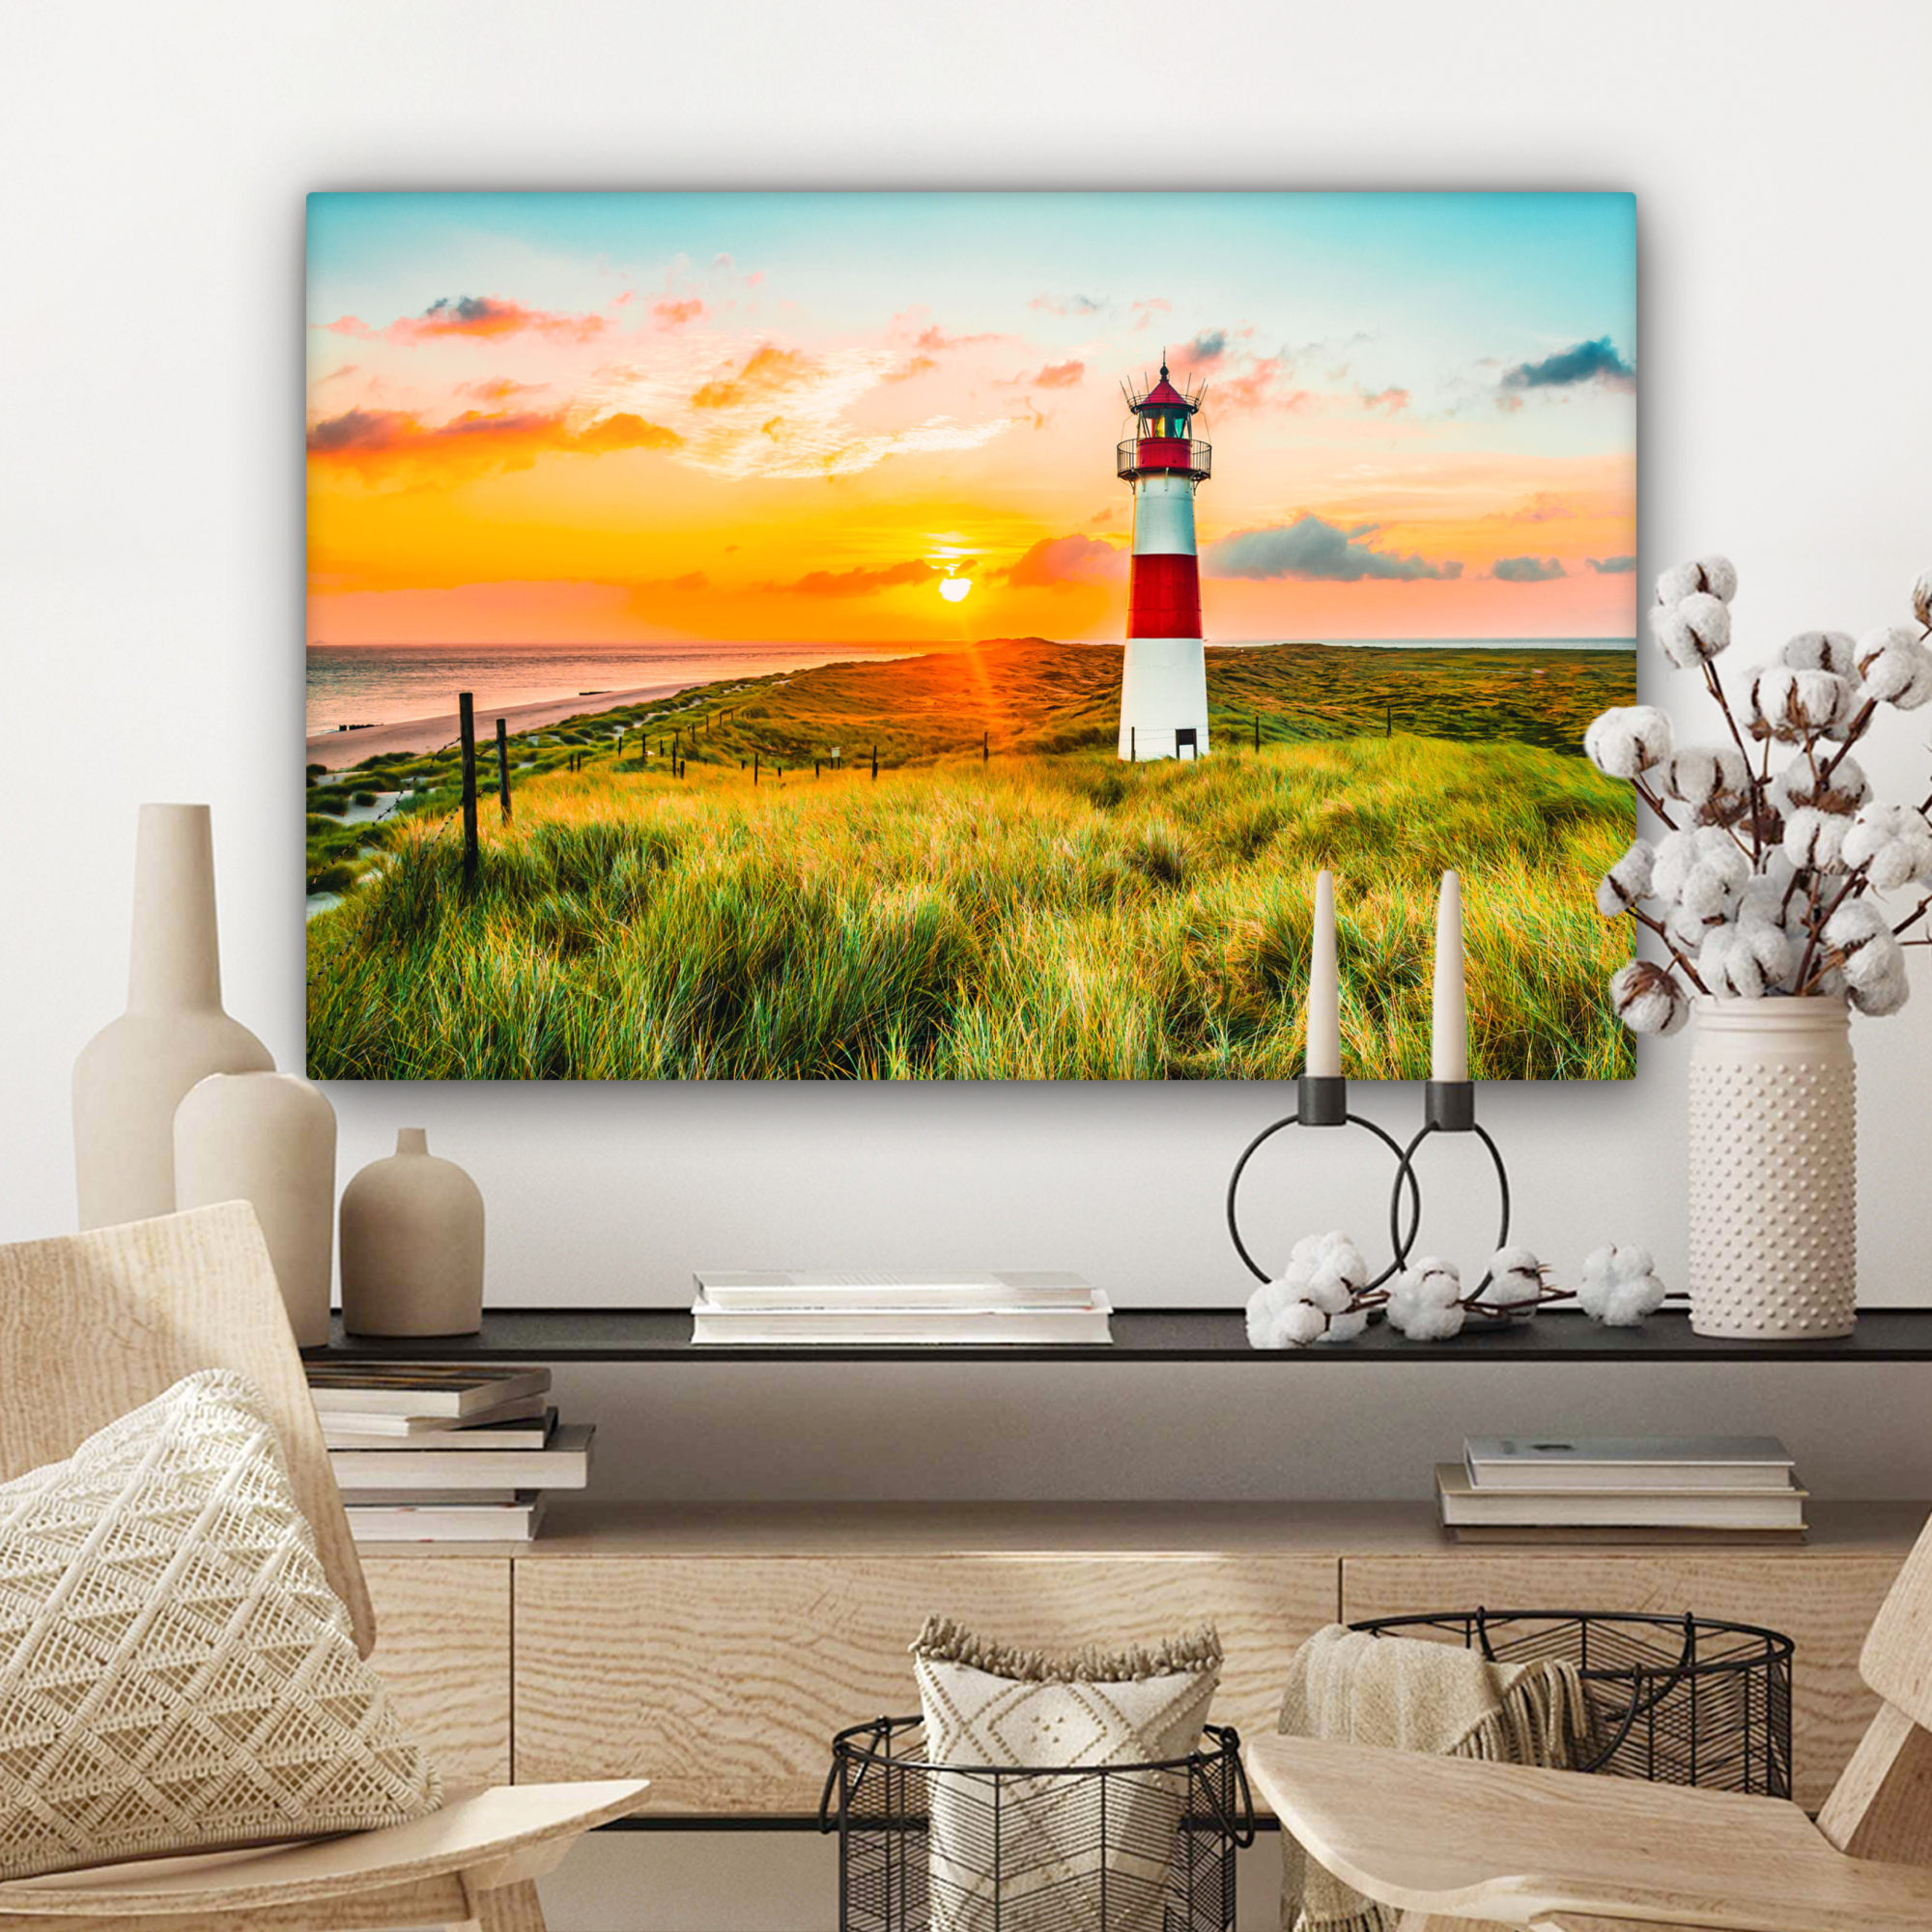 Tableau sur toile - Phare - Nature - Soleil - Paysage - Herbe - Plage - Mer-3